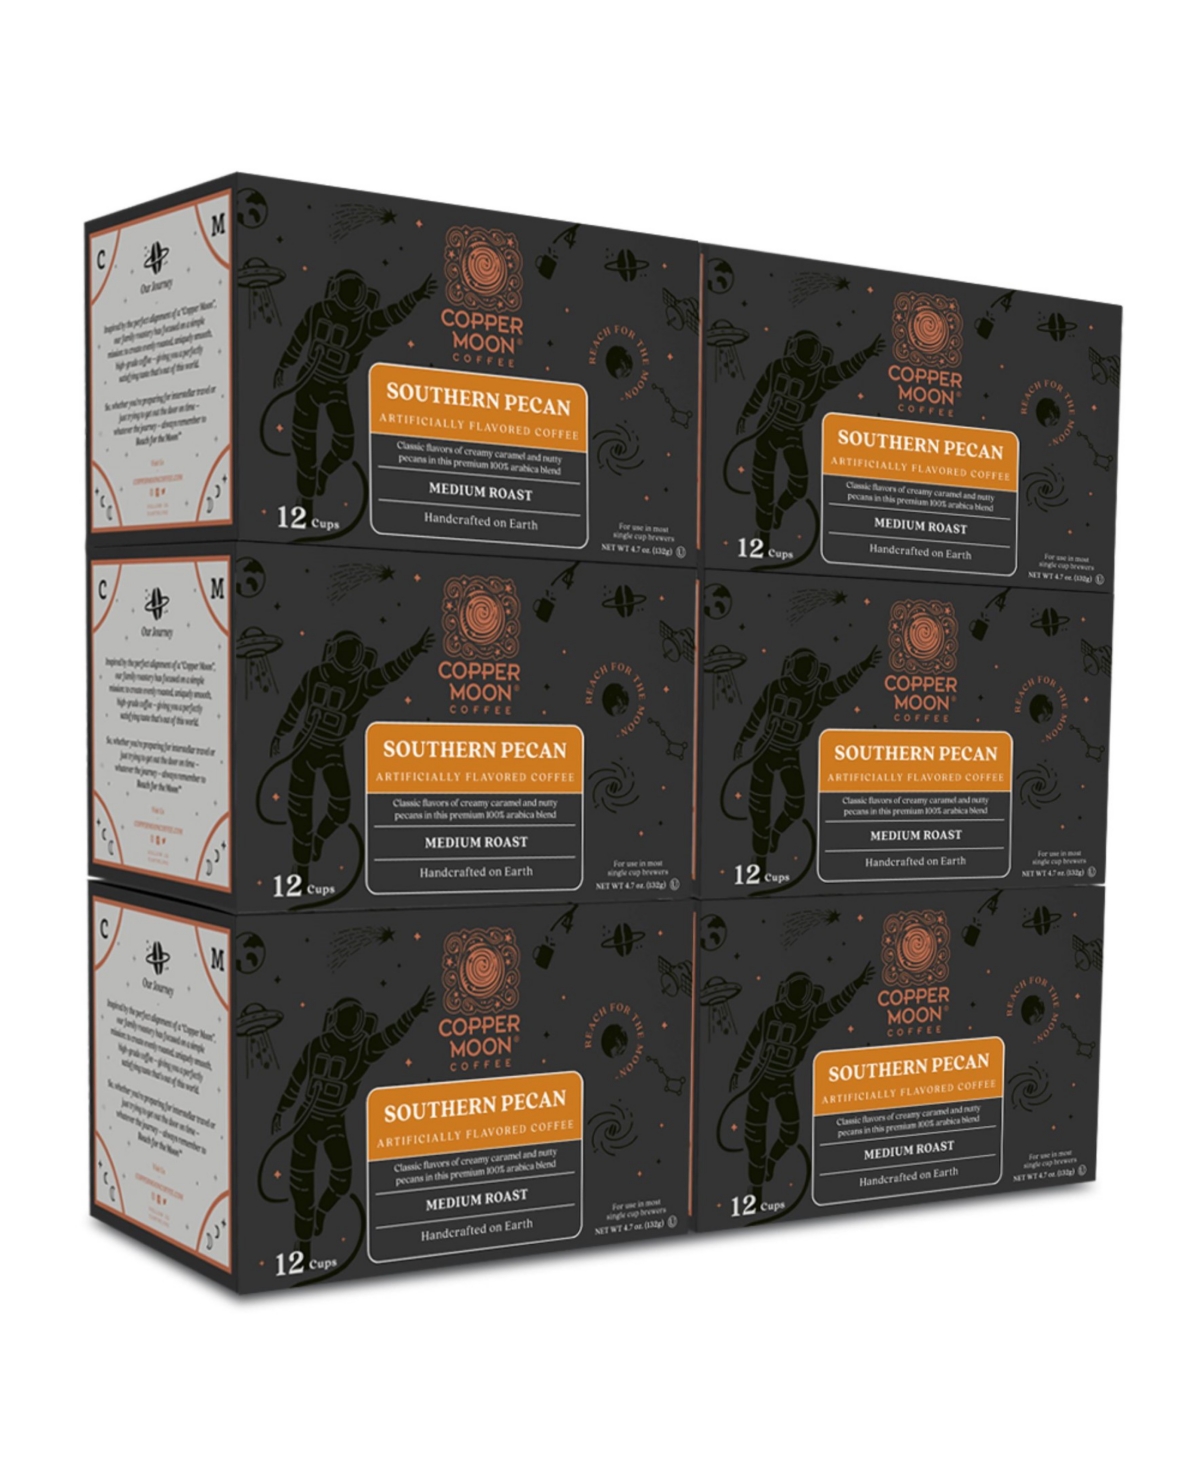 Copper Moon Coffee Southern Pecan Single Serve Coffee Pods, 72 Count